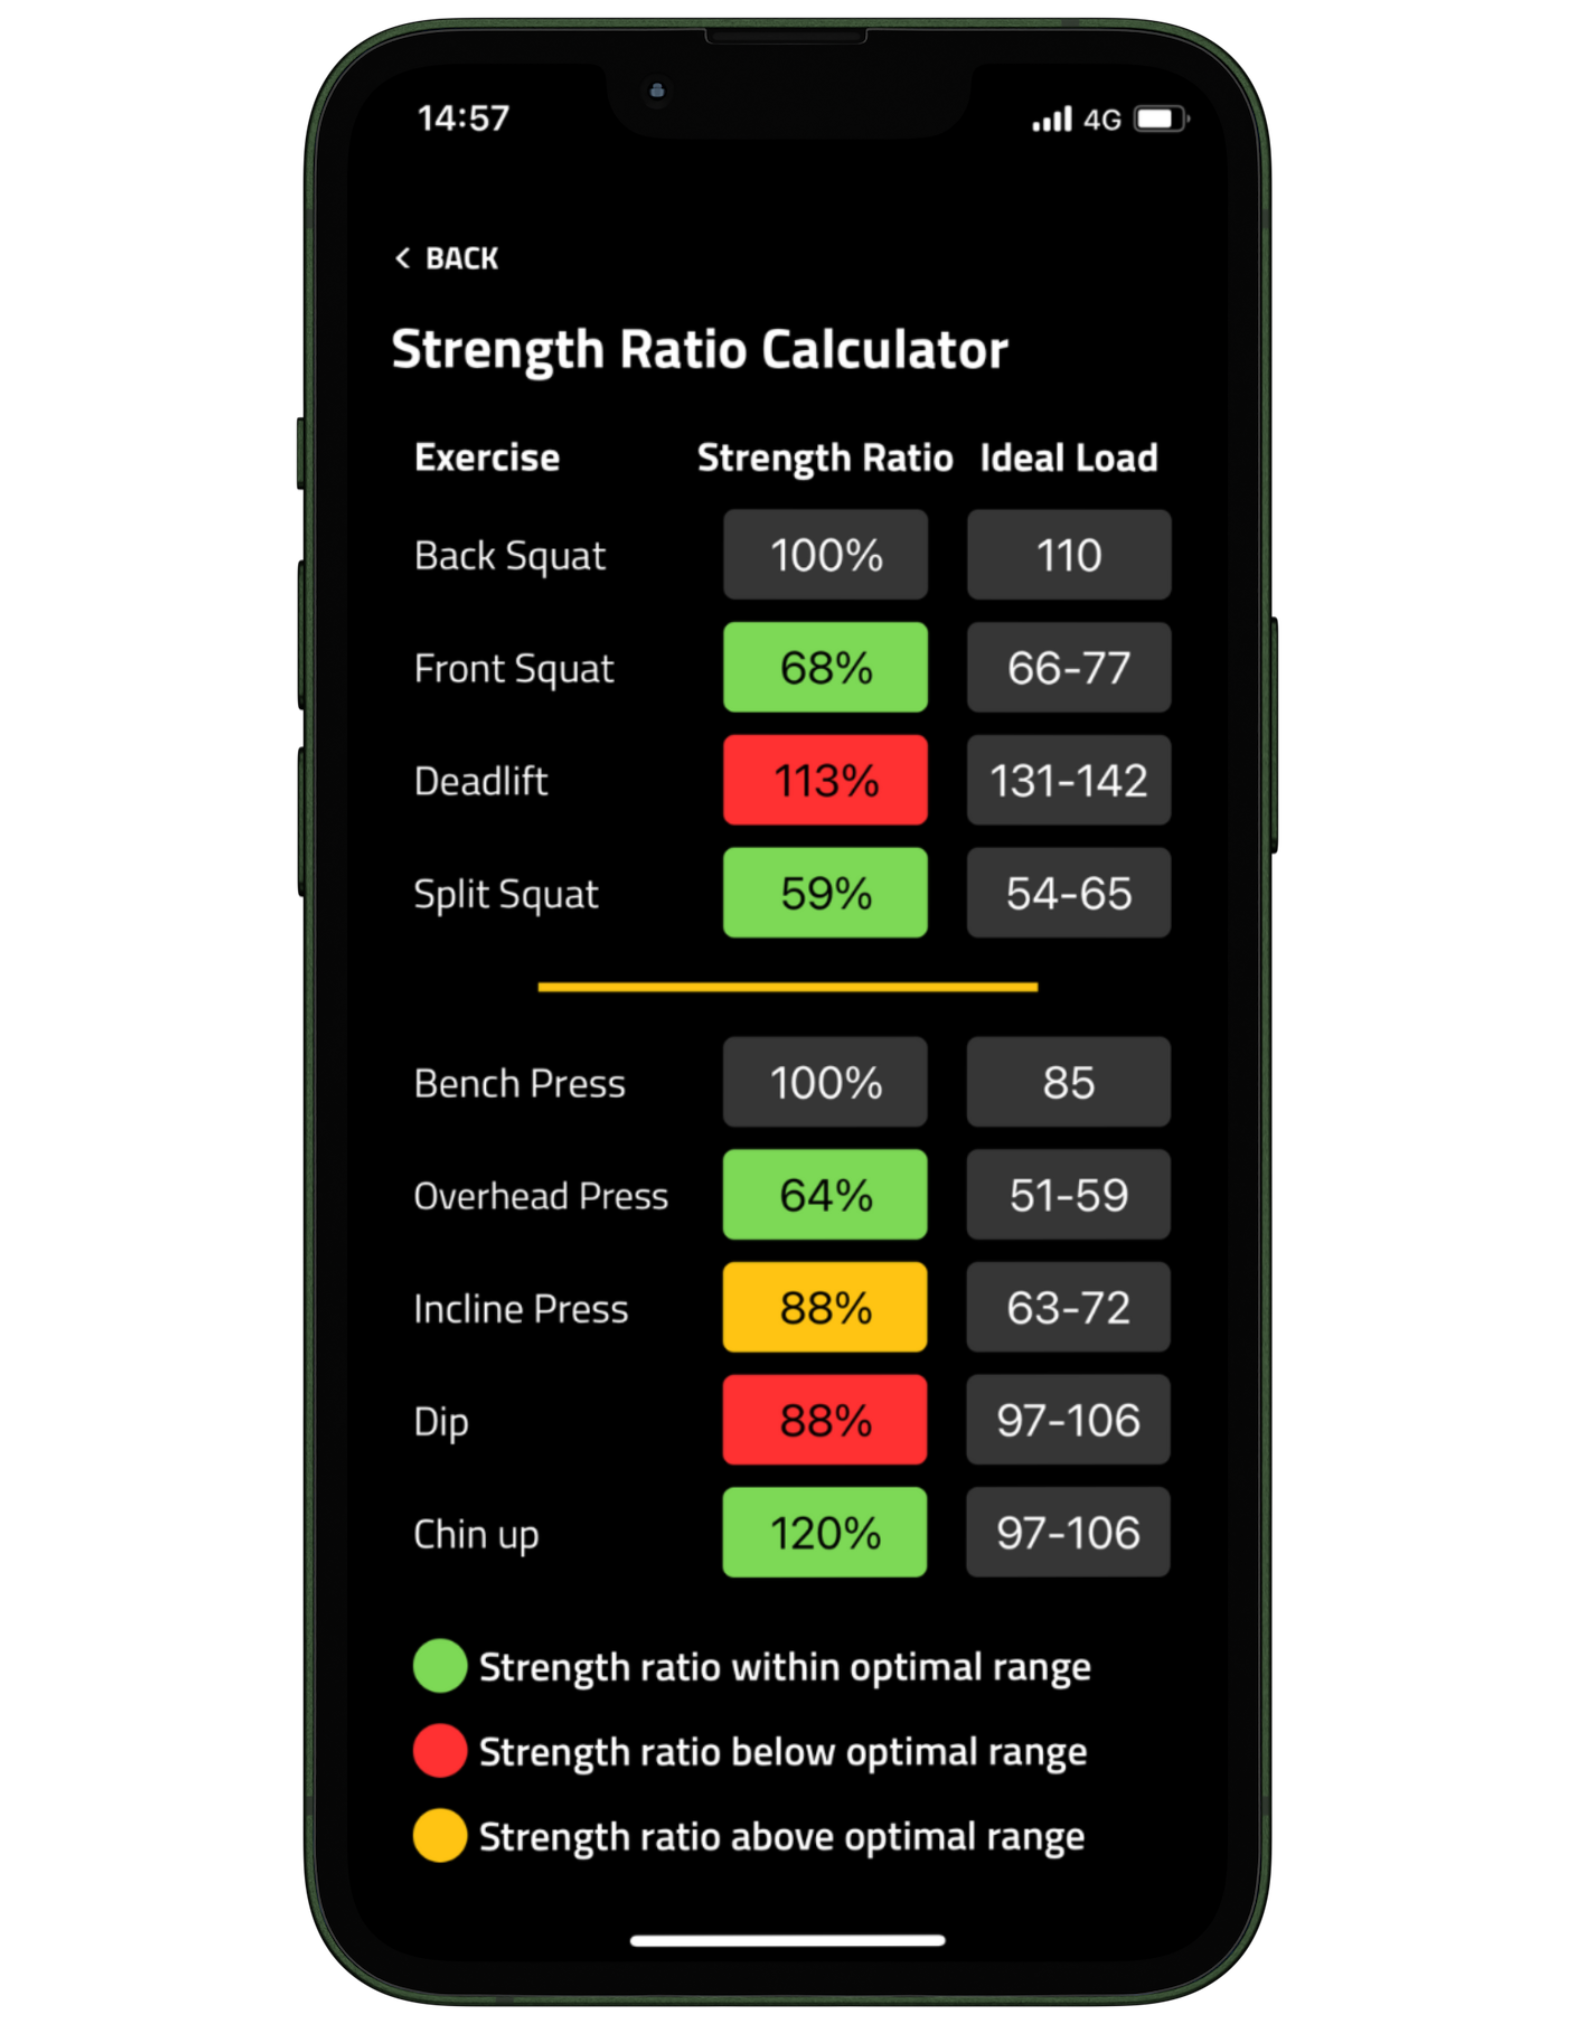 Strength ratio calculator which enables you to compare your client's strength across multiple main lifts and exposes any potential imbalances in strength